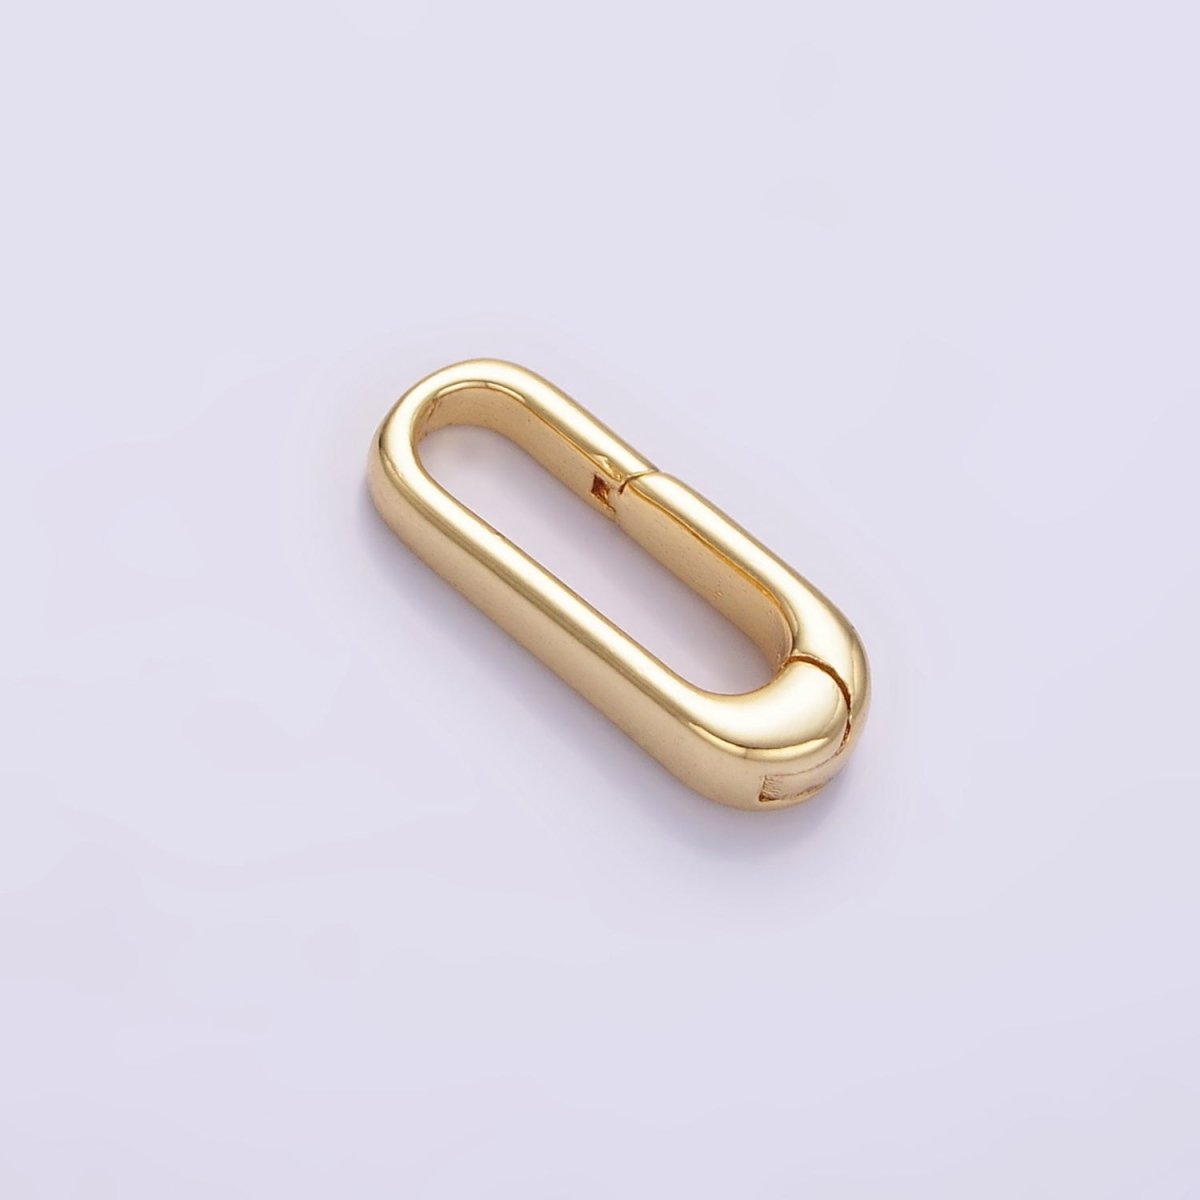 24K Gold Filled 15mm Oblong Push Spring Gate Findings in Gold & Silver | Z804 - DLUXCA